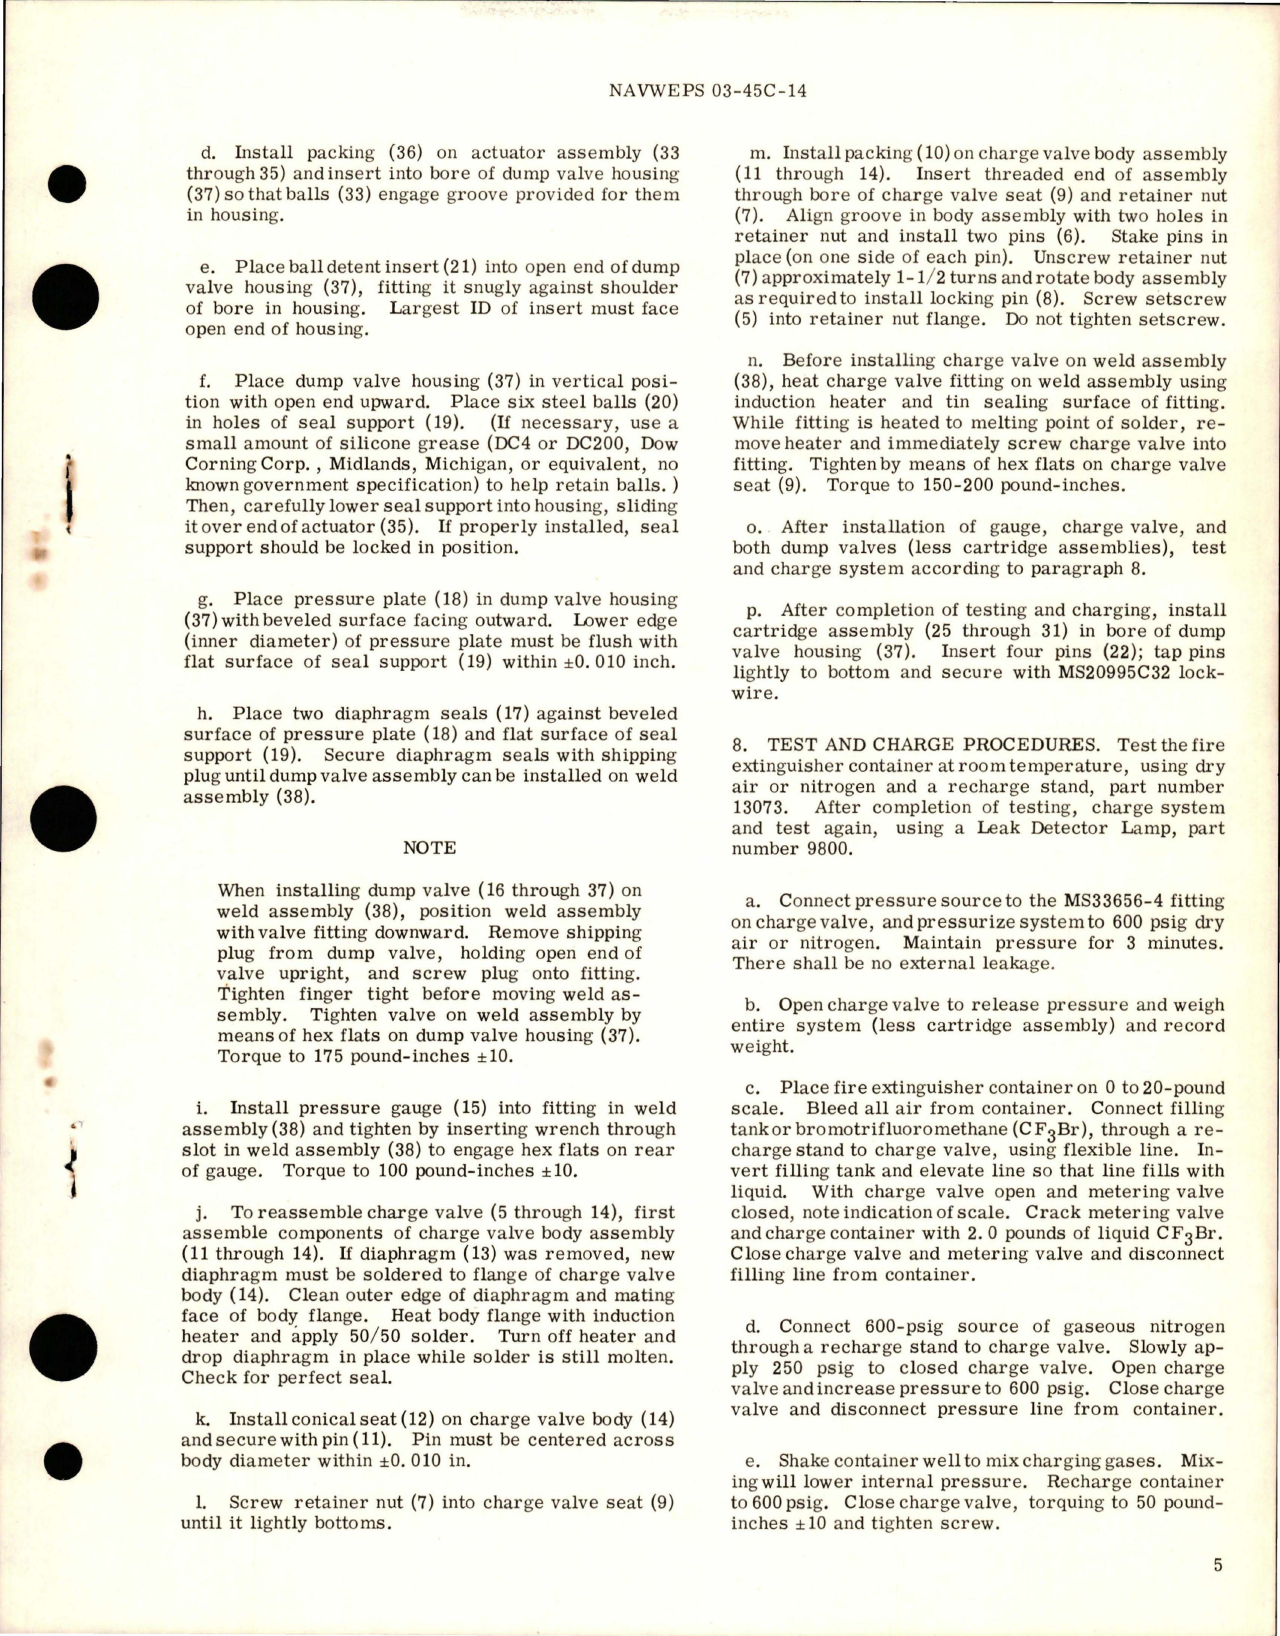 Sample page 5 from AirCorps Library document: Overhaul Instructions with Parts Breakdown for Dual Squib - Dual Outlet Fire Extinguisher Container - Part 2911115-1